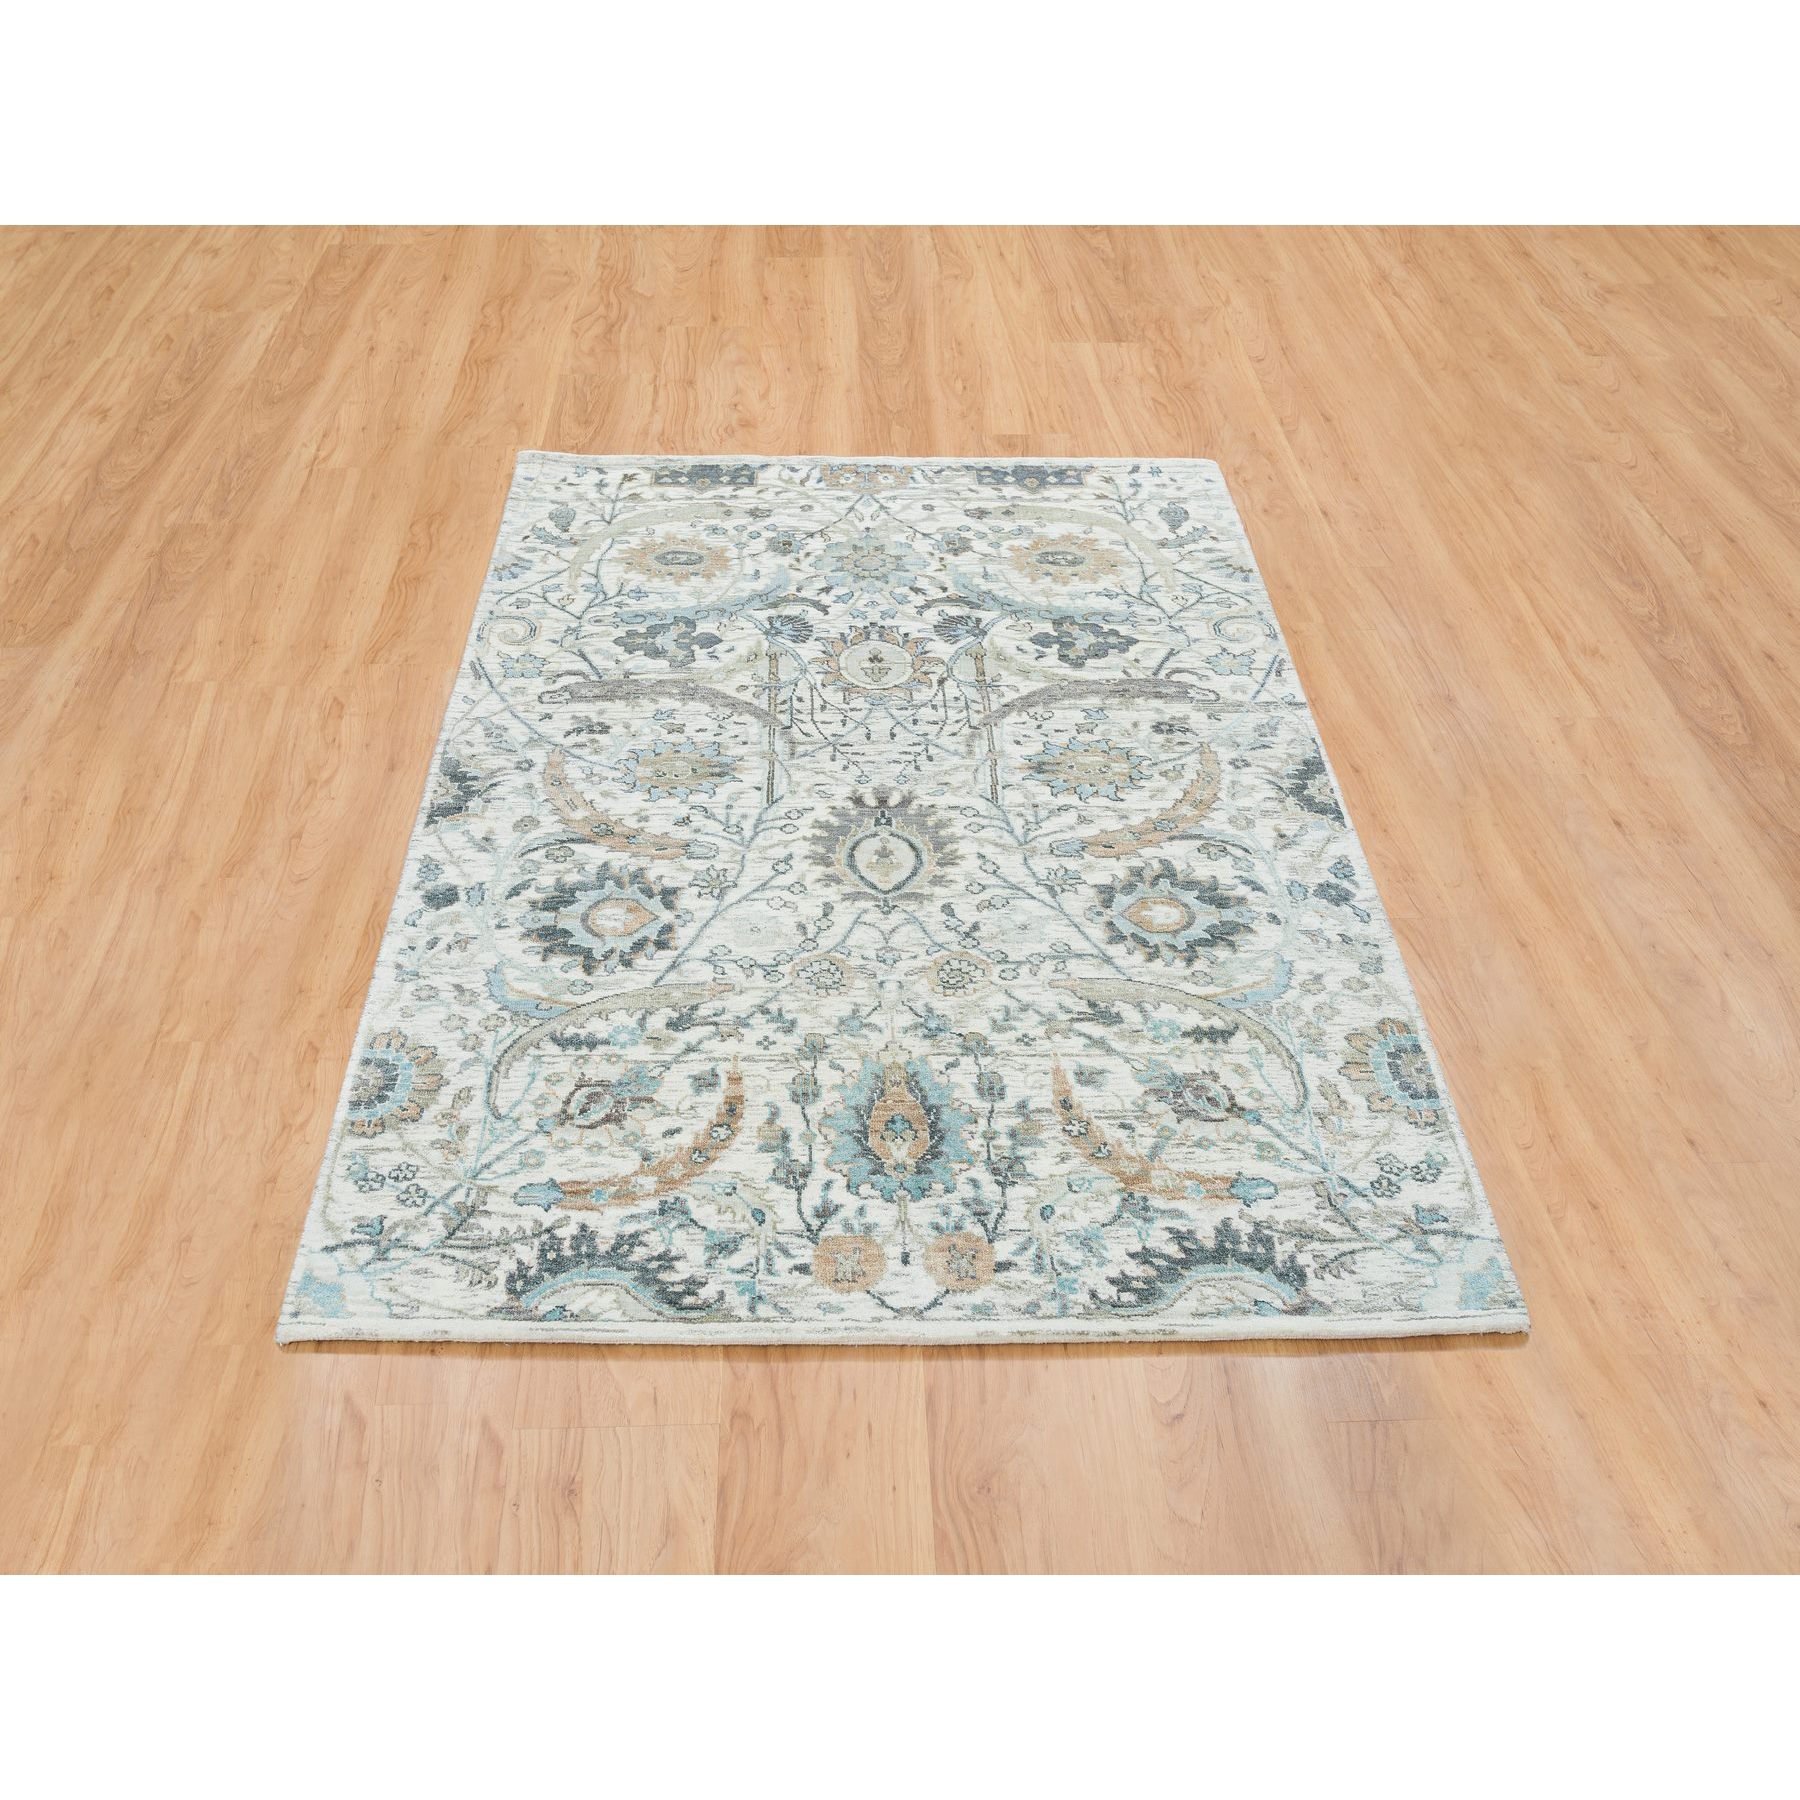 4'2"x6'2" Ivory, Hand Woven Sickle Leaf Design, Soft Pile Silk With Textured Wool, Oriental Rug 